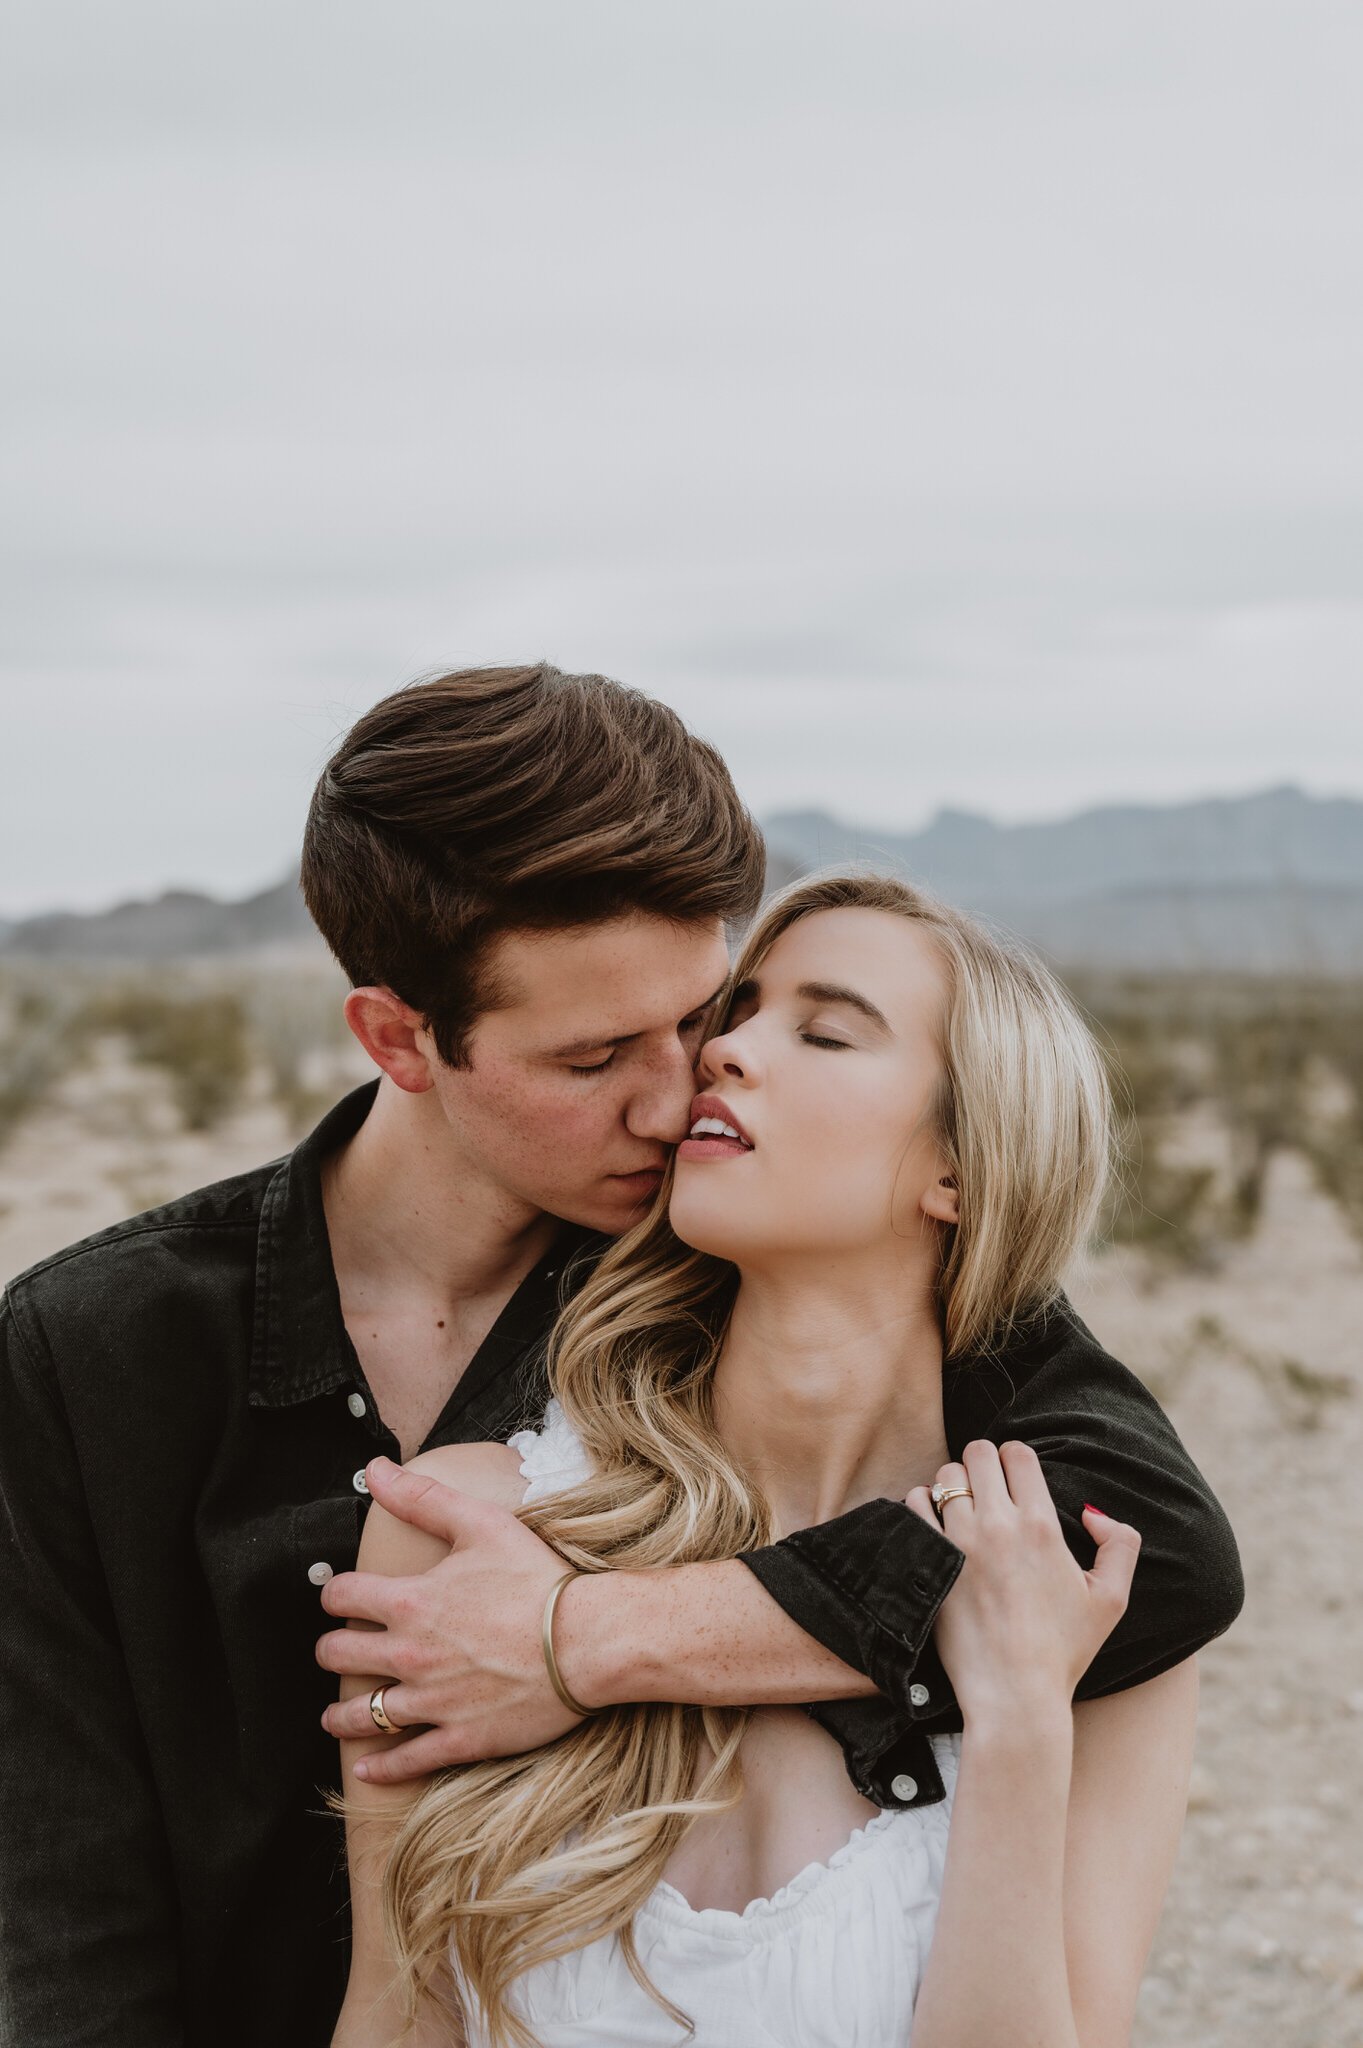 Kaylie-Sirek-Photography-Big-Bend-National-Park-Texas-Engagement-Session-Styled-You-024.jpg